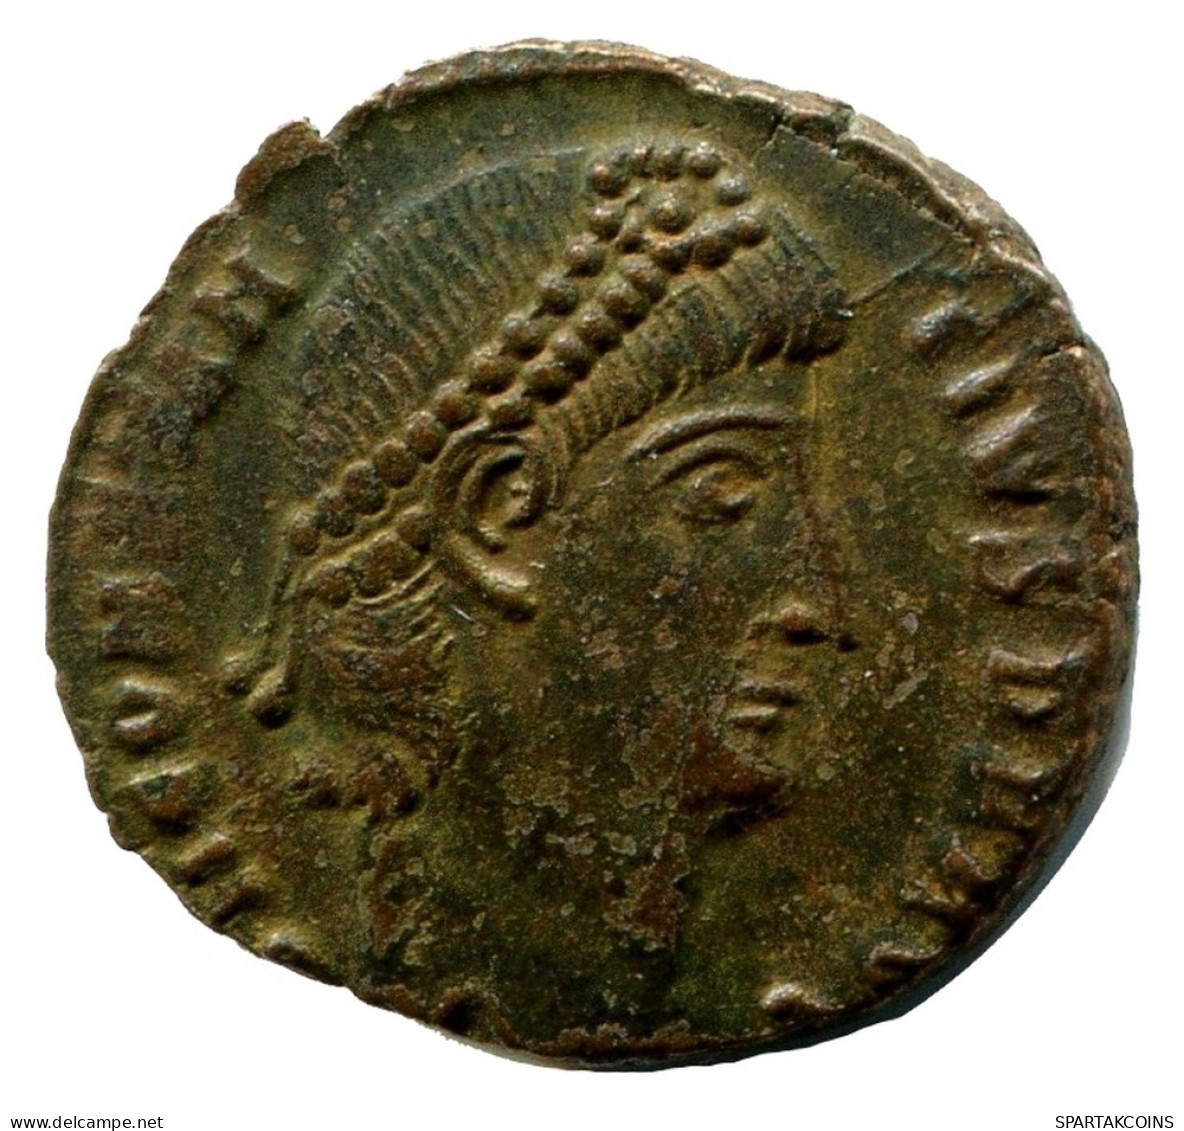 CONSTANTIUS II MINTED IN ANTIOCH FOUND IN IHNASYAH HOARD EGYPT #ANC11228.14.D.A - El Imperio Christiano (307 / 363)